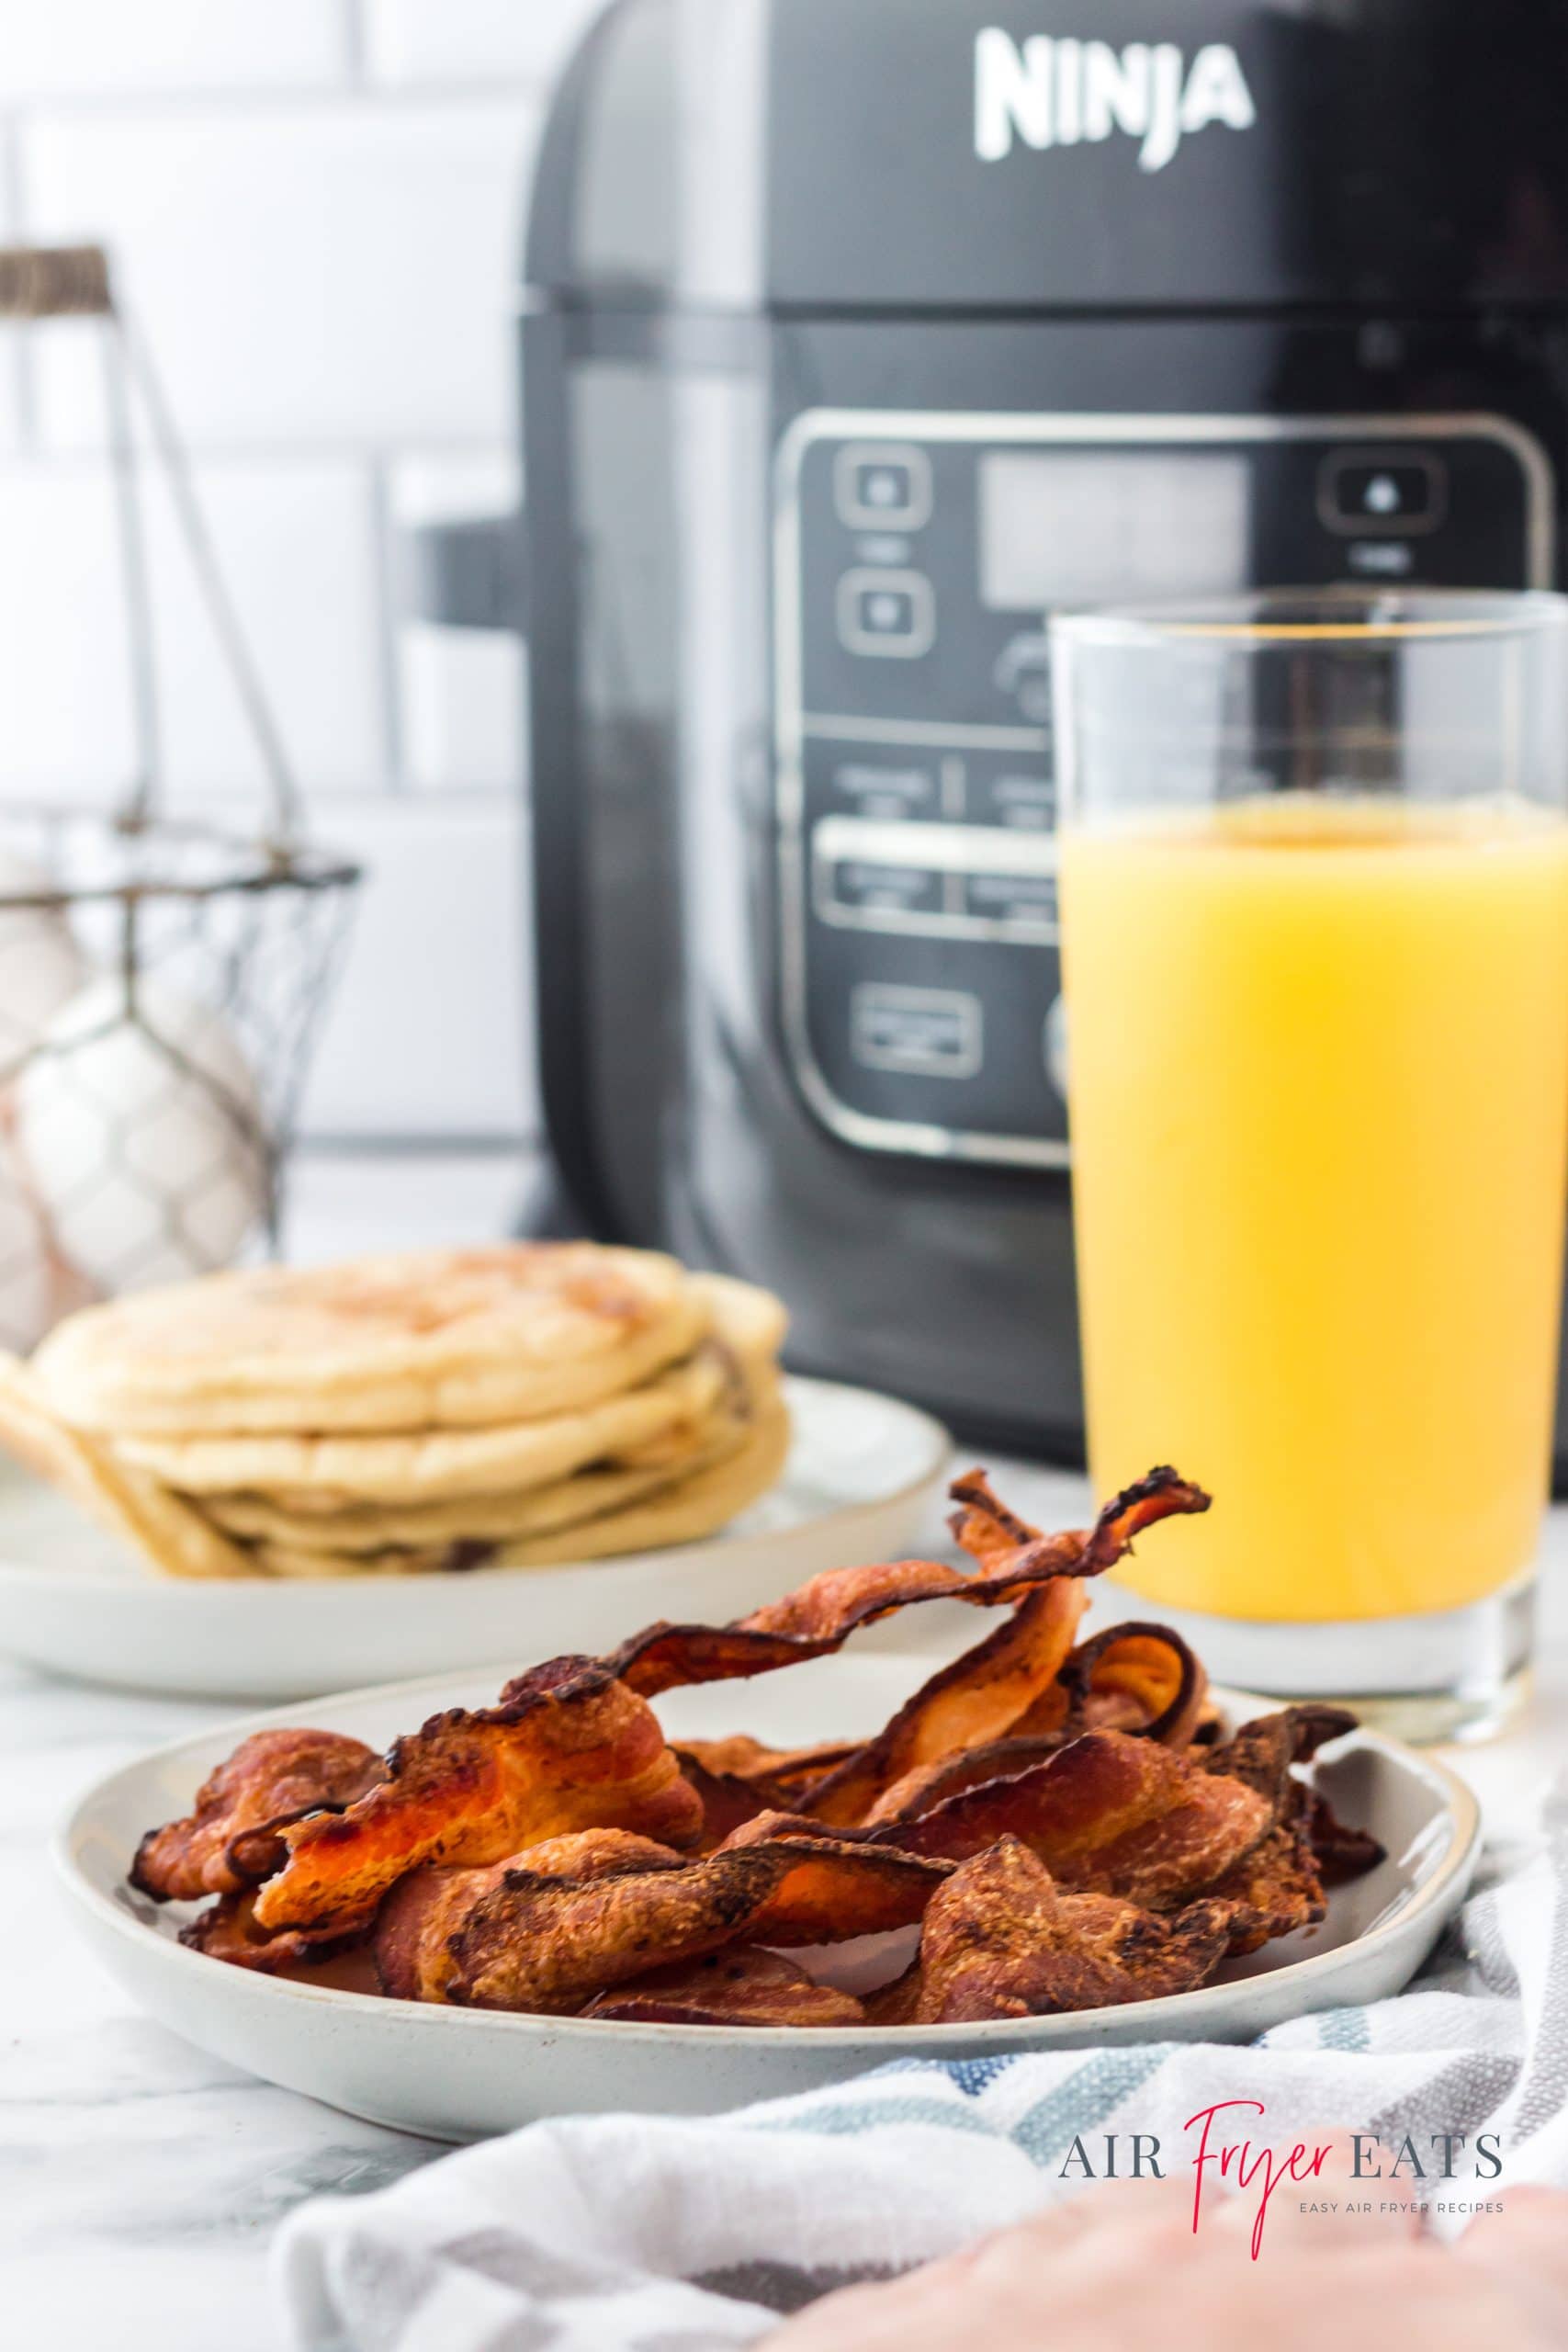 a breakfast of a plate of bacon, a stack of pancakes, and a tall glass of orange juice in front of a ninja foodi multicooker